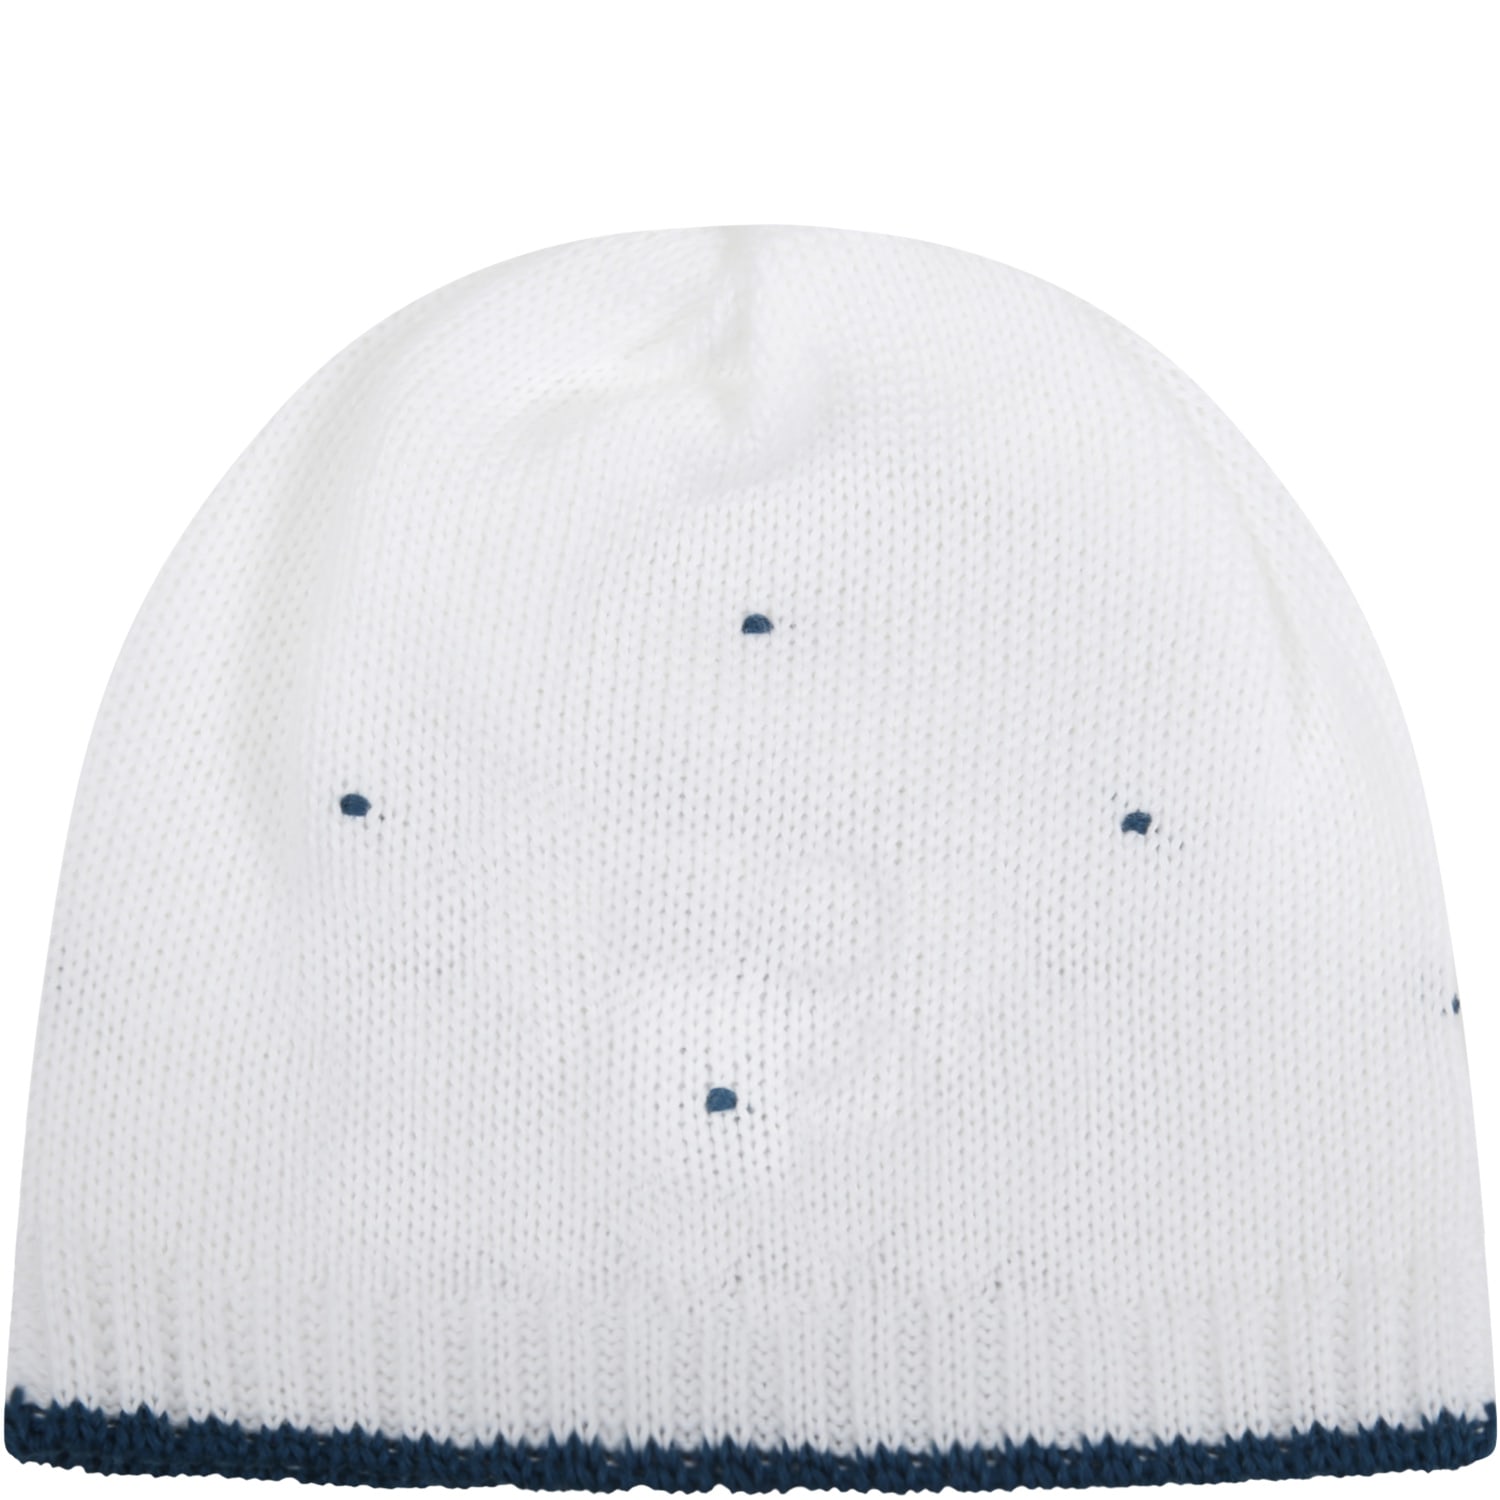 Little Bear White Hat For Babyboy With Polka-dots